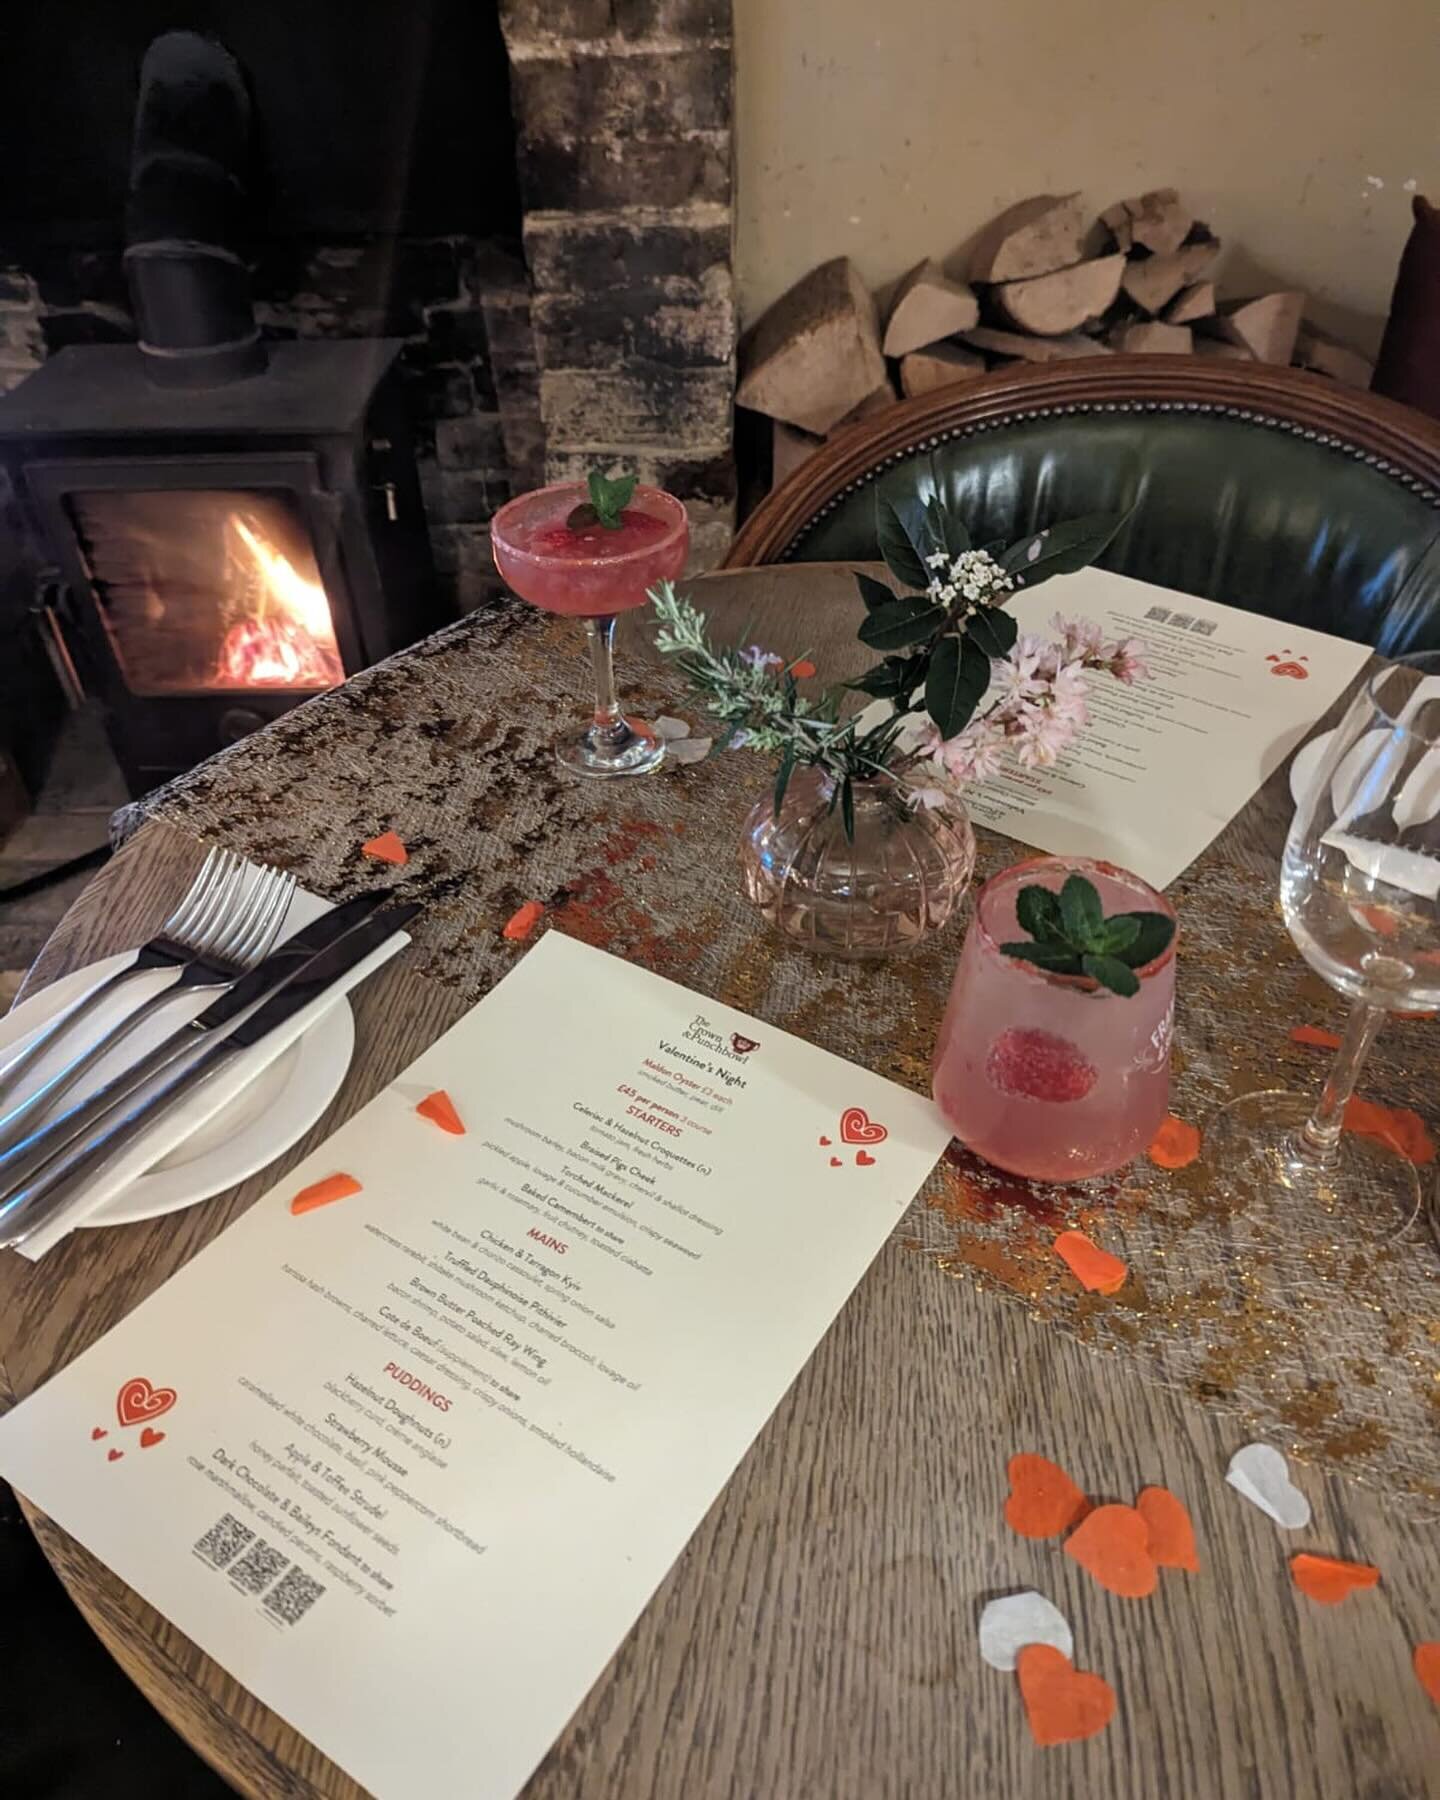 Left booking up for Valentine&rsquo;s a little late this year? We&rsquo;re almost fully booked in the city but we have some free spots available across our country pubs. There&rsquo;s three-course set menus, romantic sharer dishes and love potions co